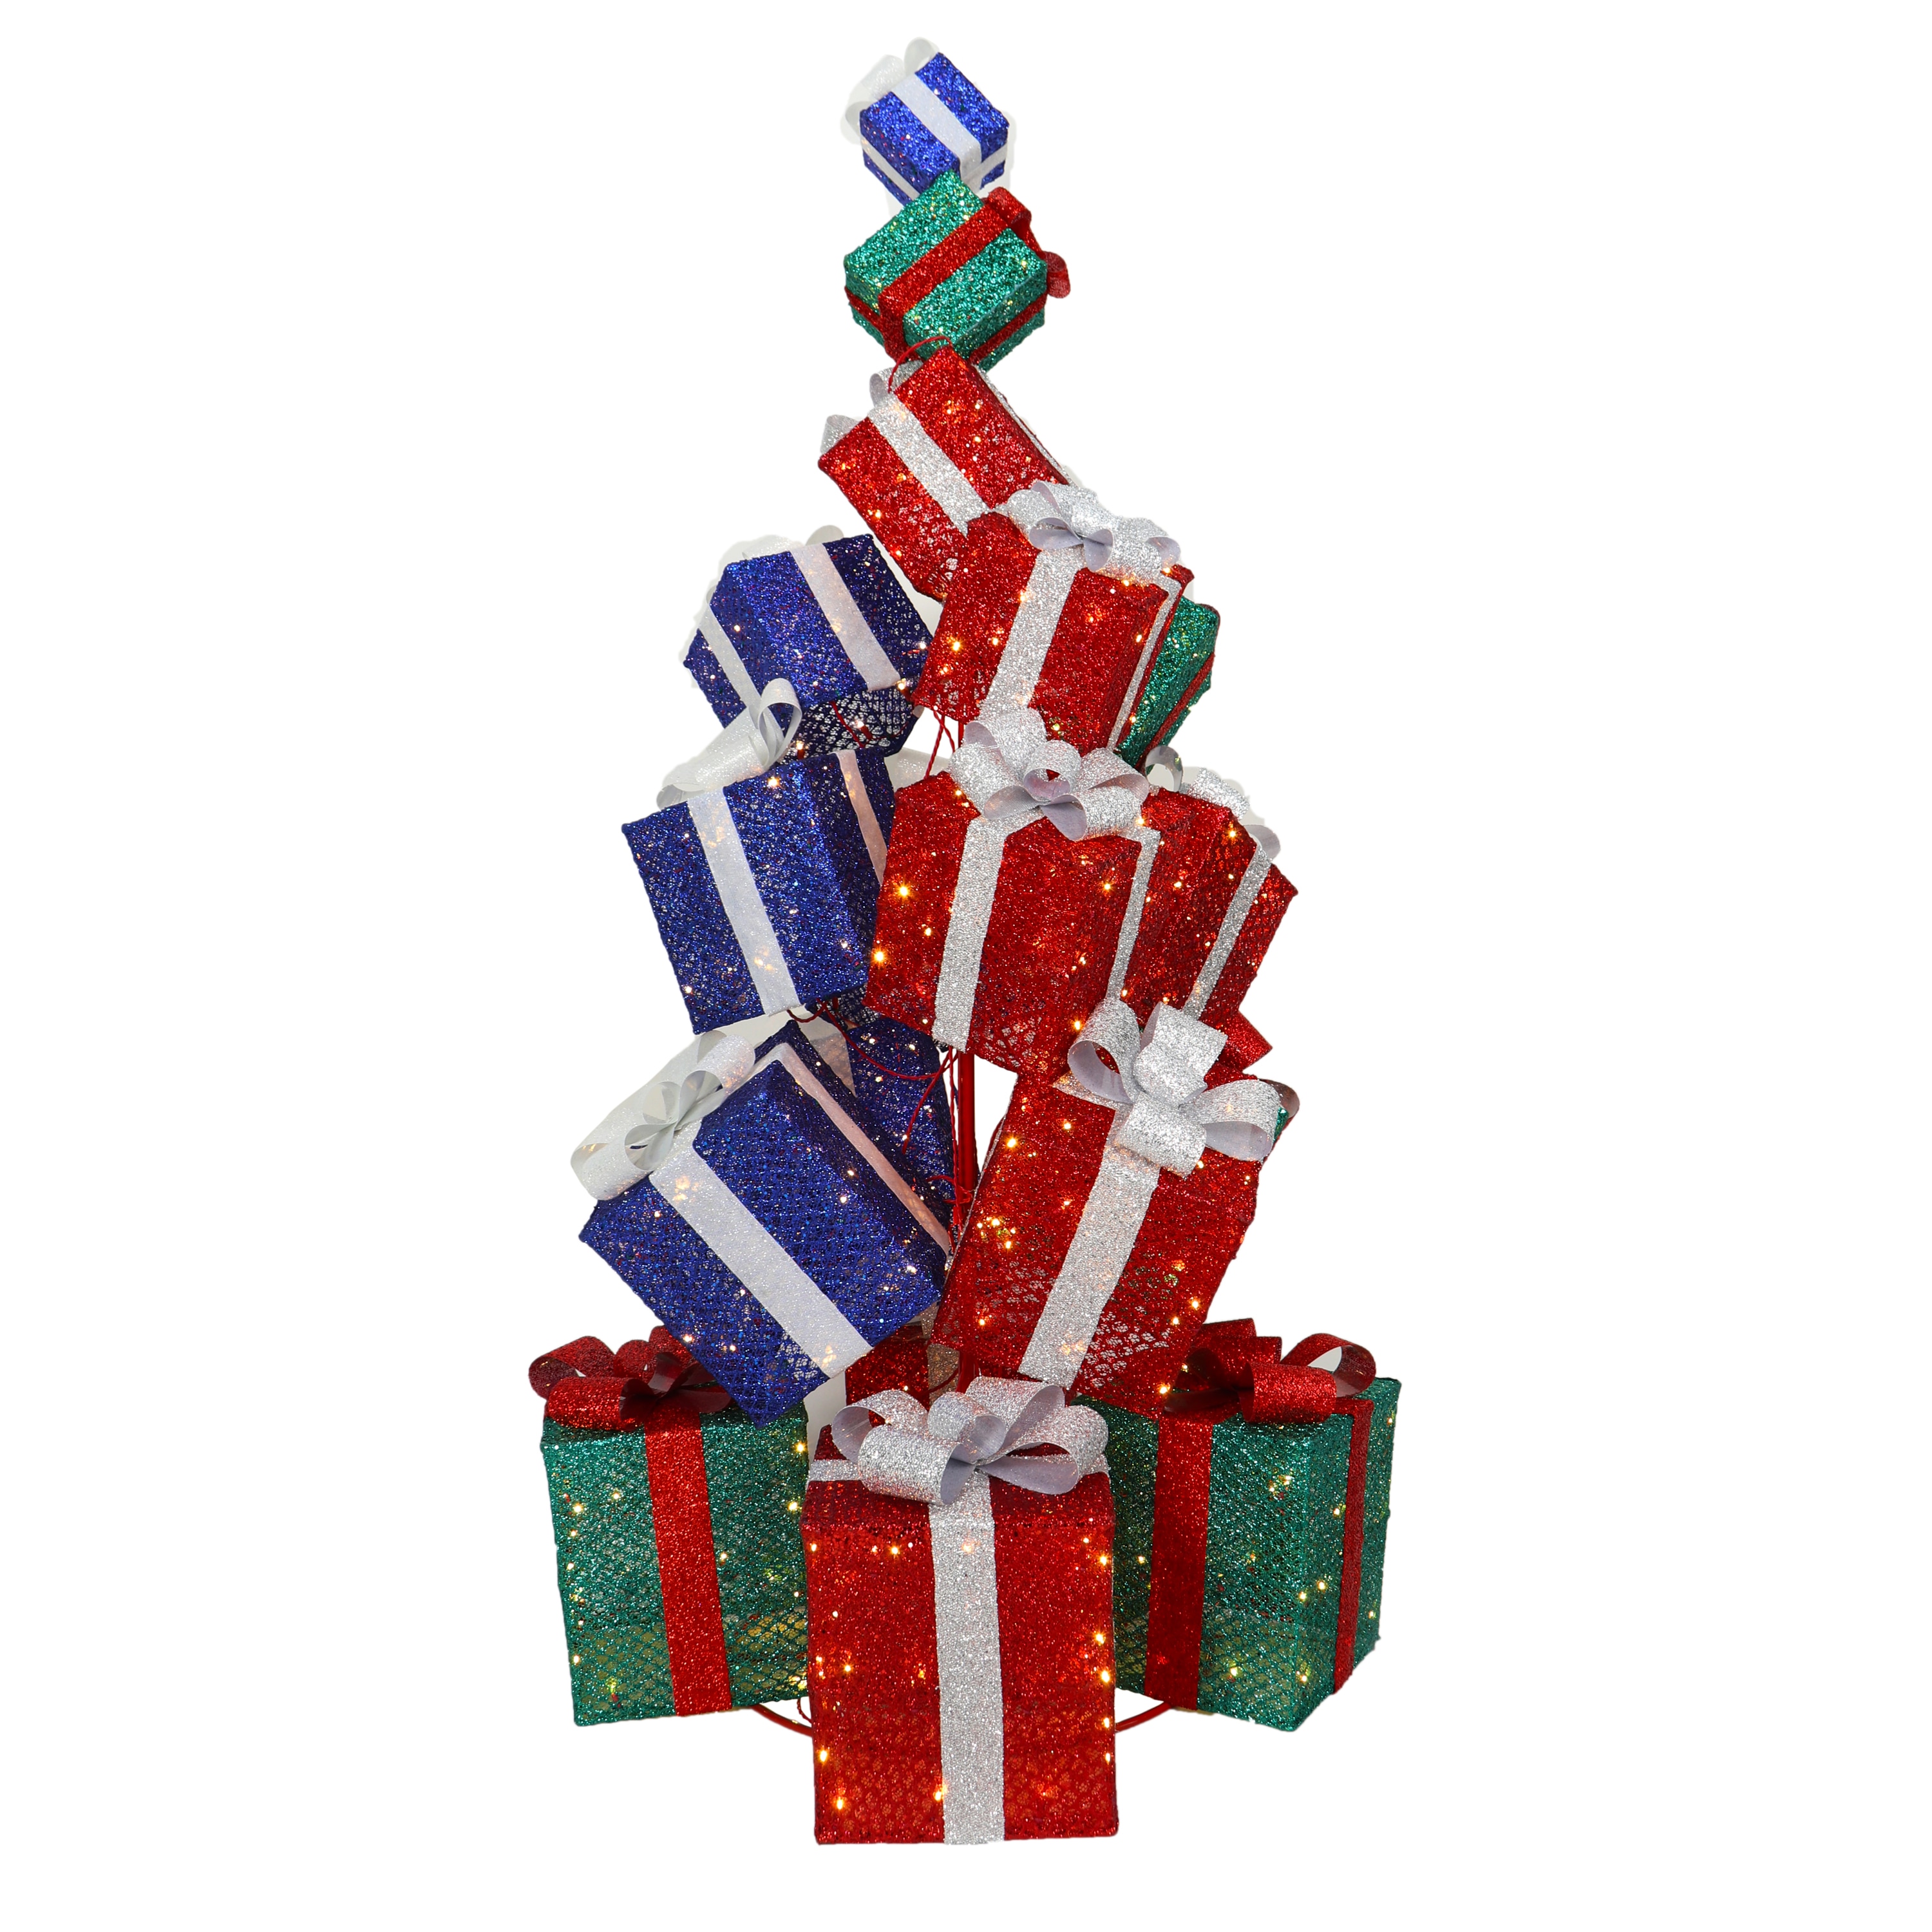 Outdoor Lit Stackable Christmas Gifts